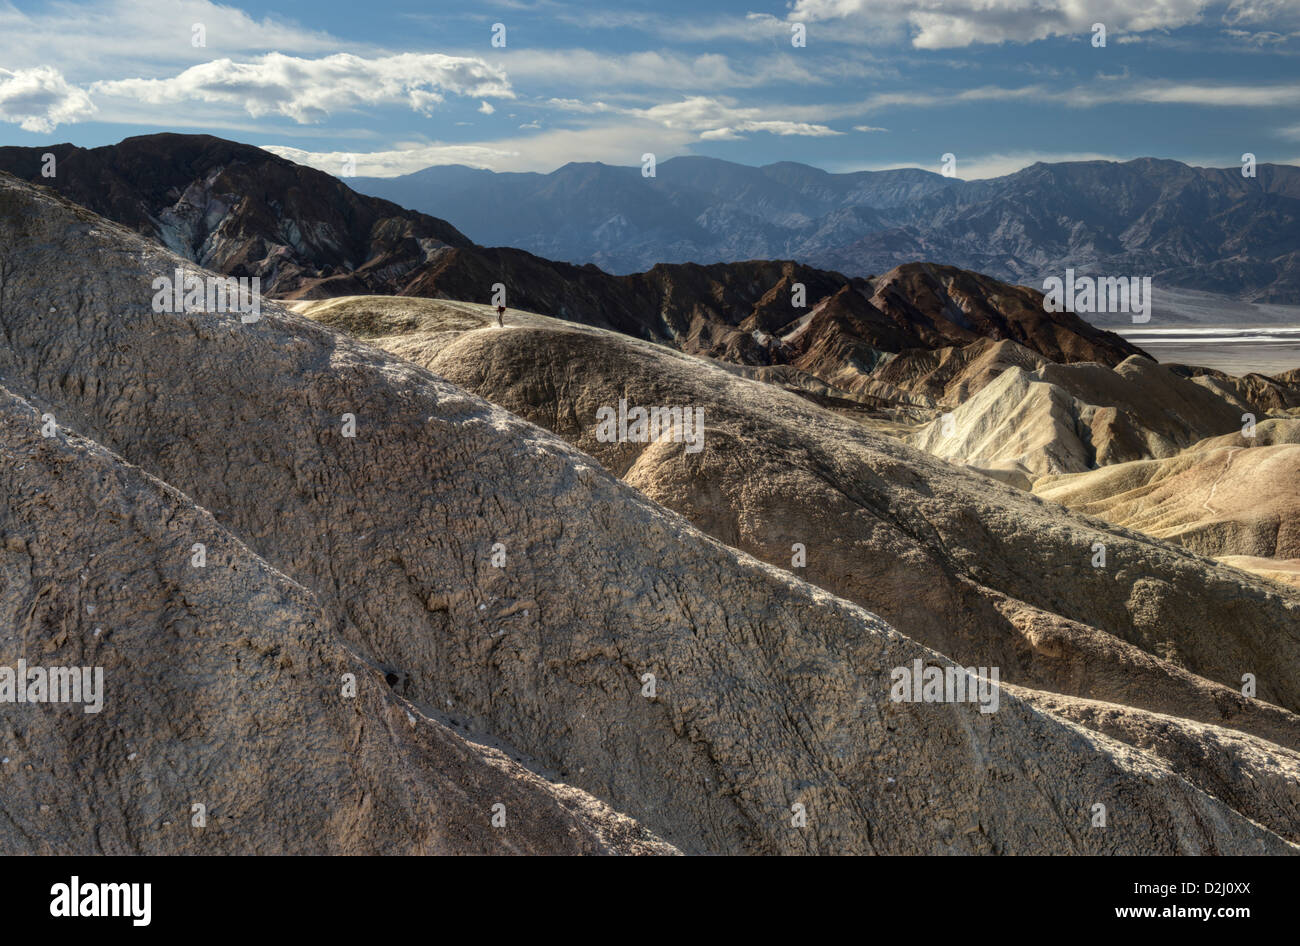 A hiker ascends the ridges of mudstone at Zabriskie Point in Death Valley National Park, California Stock Photo